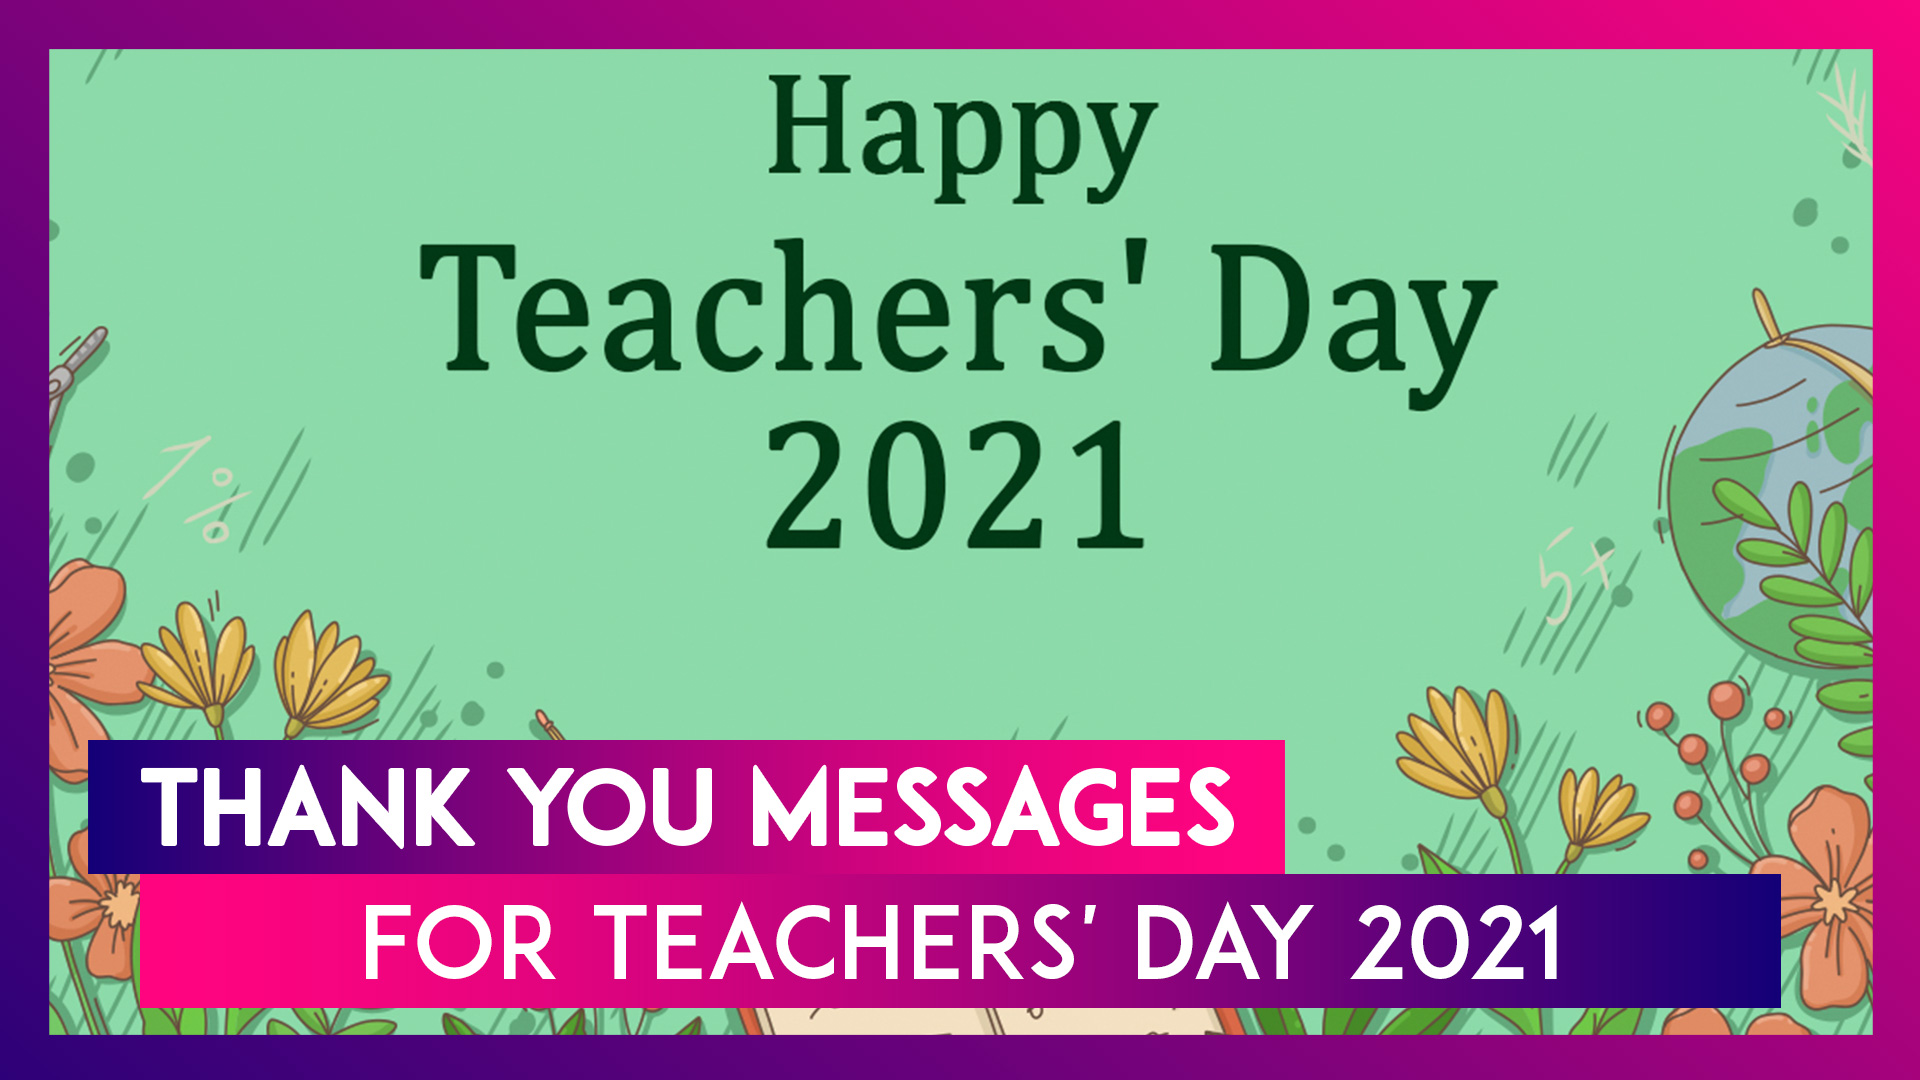 Teachers' Day 2021 Wishes: 'Thank You' Messages, Quotes and Greetings For Your Beloved Mentor